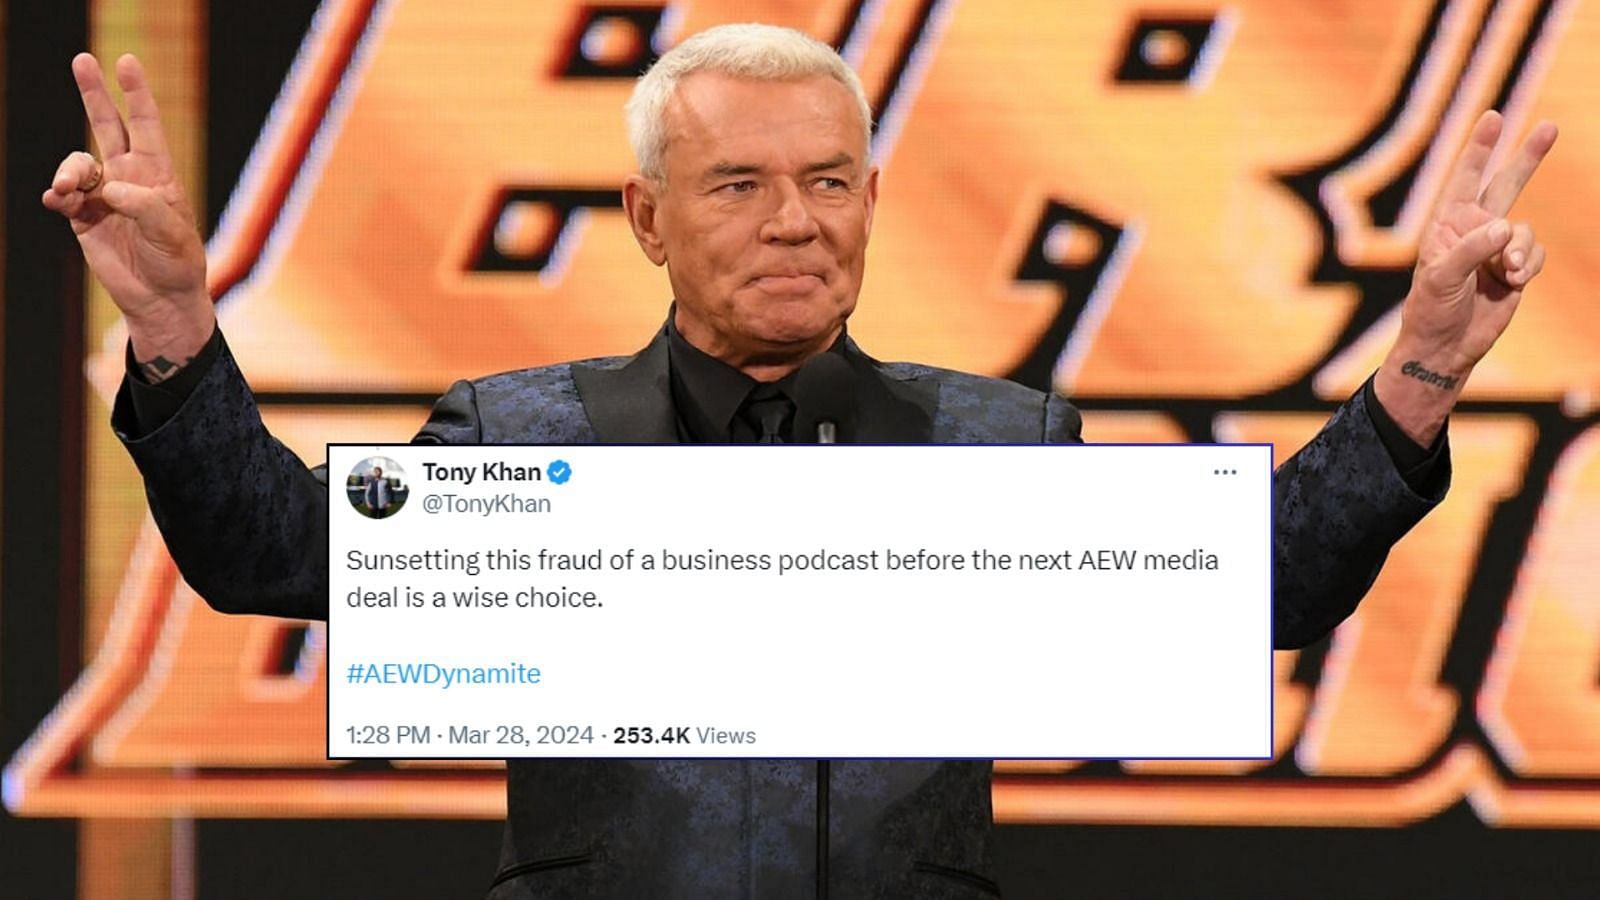 Eric Bischoff claps back at Tony Khan [Image credits: WWE gallery and Tony Khan